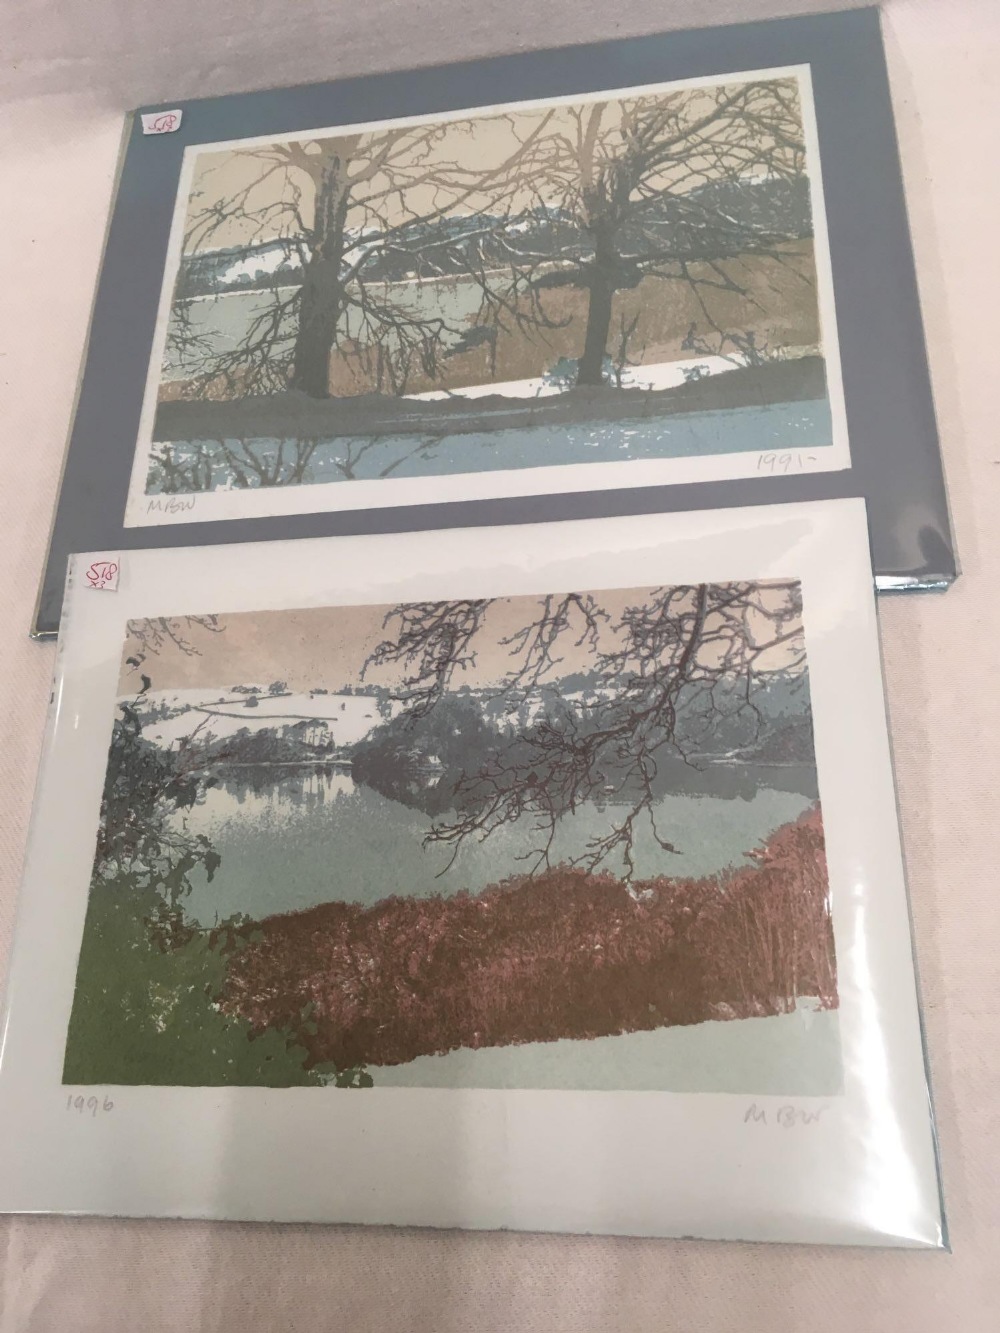 MARY BERESFORD-WILLIAMS; GROUP OF 3 UNFRAMED SCREEN PRINTS OF LANDSCAPES. - Image 3 of 3